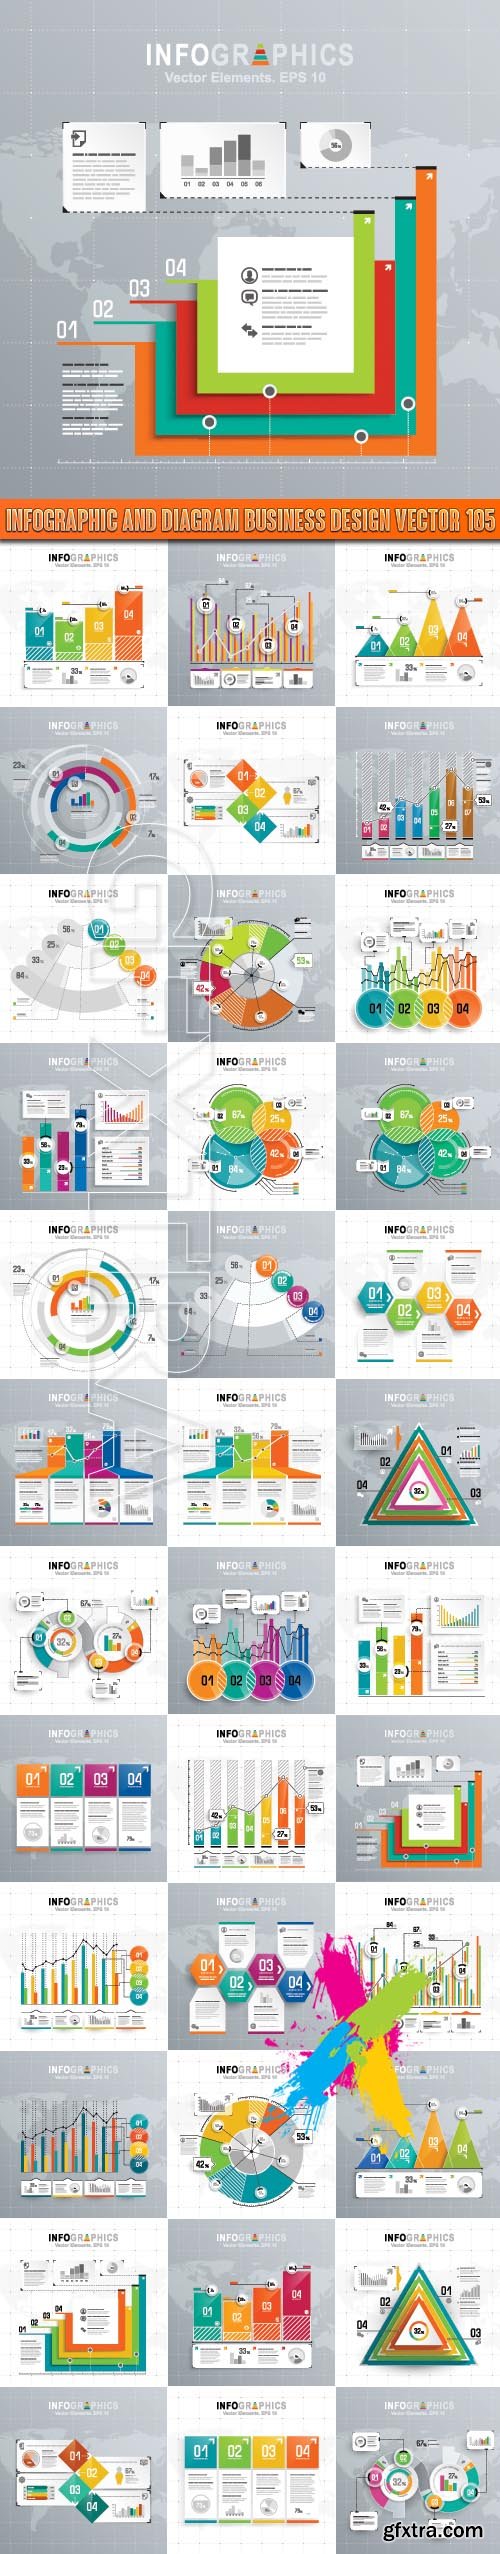 Infographic and diagram business design vector 105